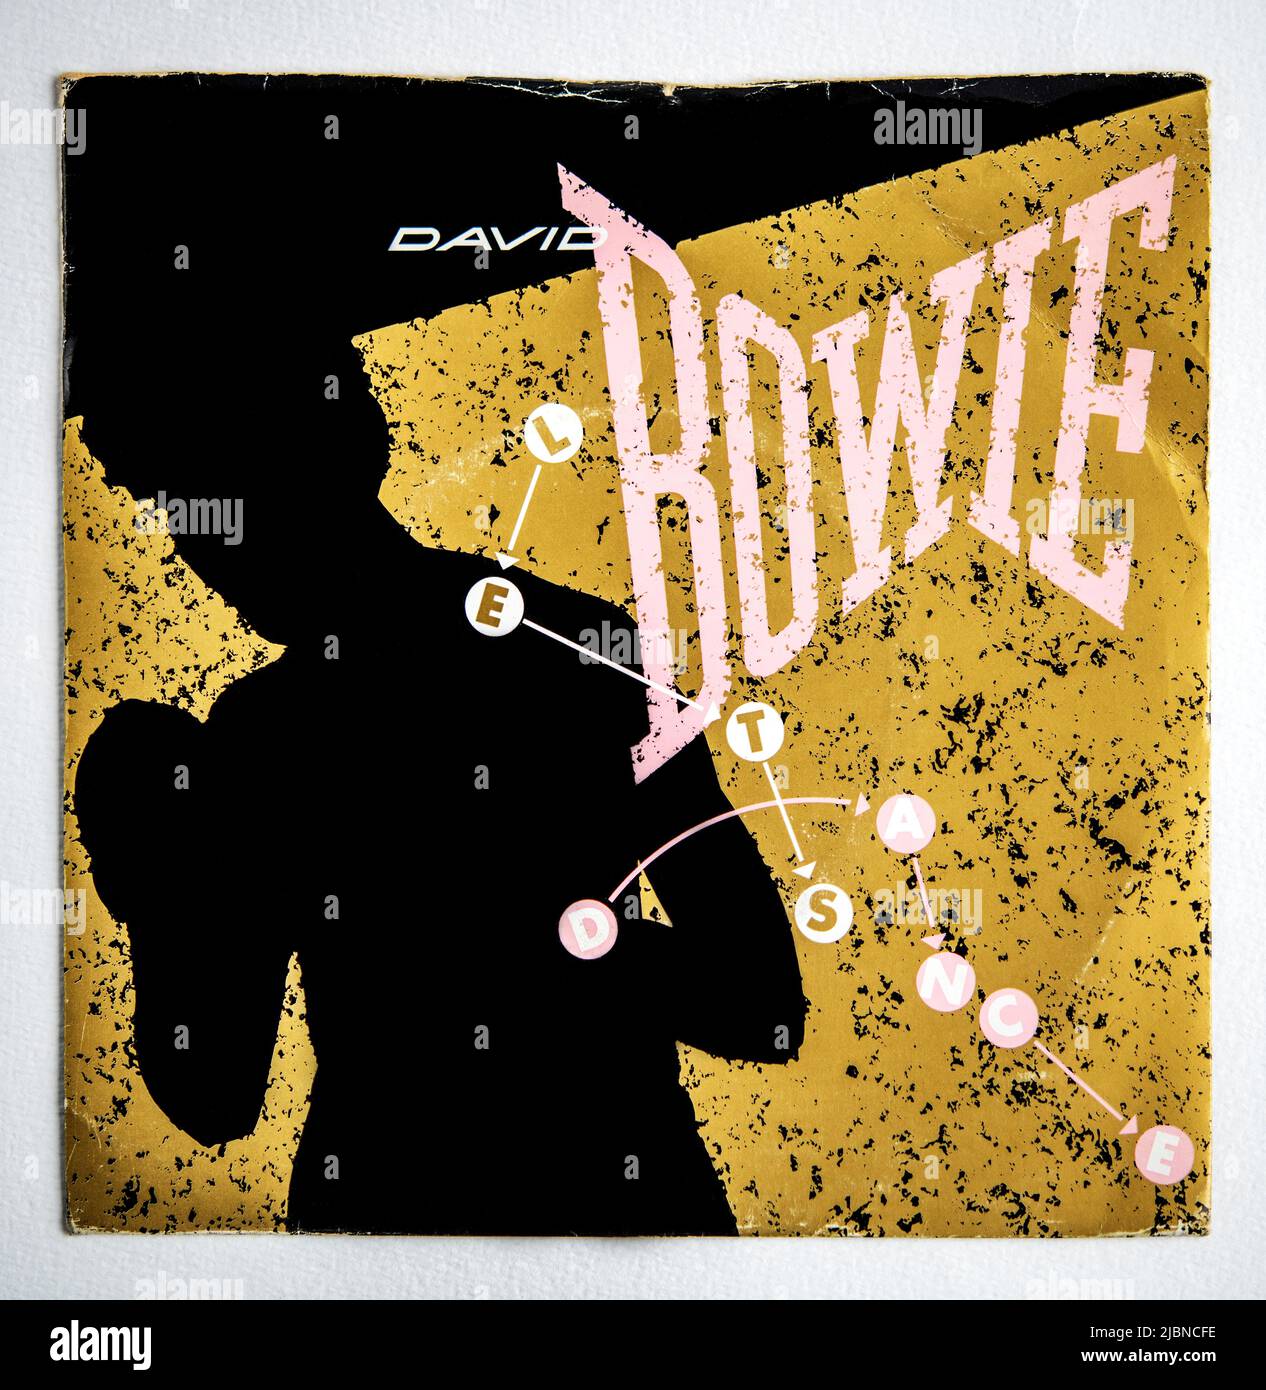 Picture cover of the seven inch single version of Let's Dance by David Bowie, which was released in 1983 Stock Photo